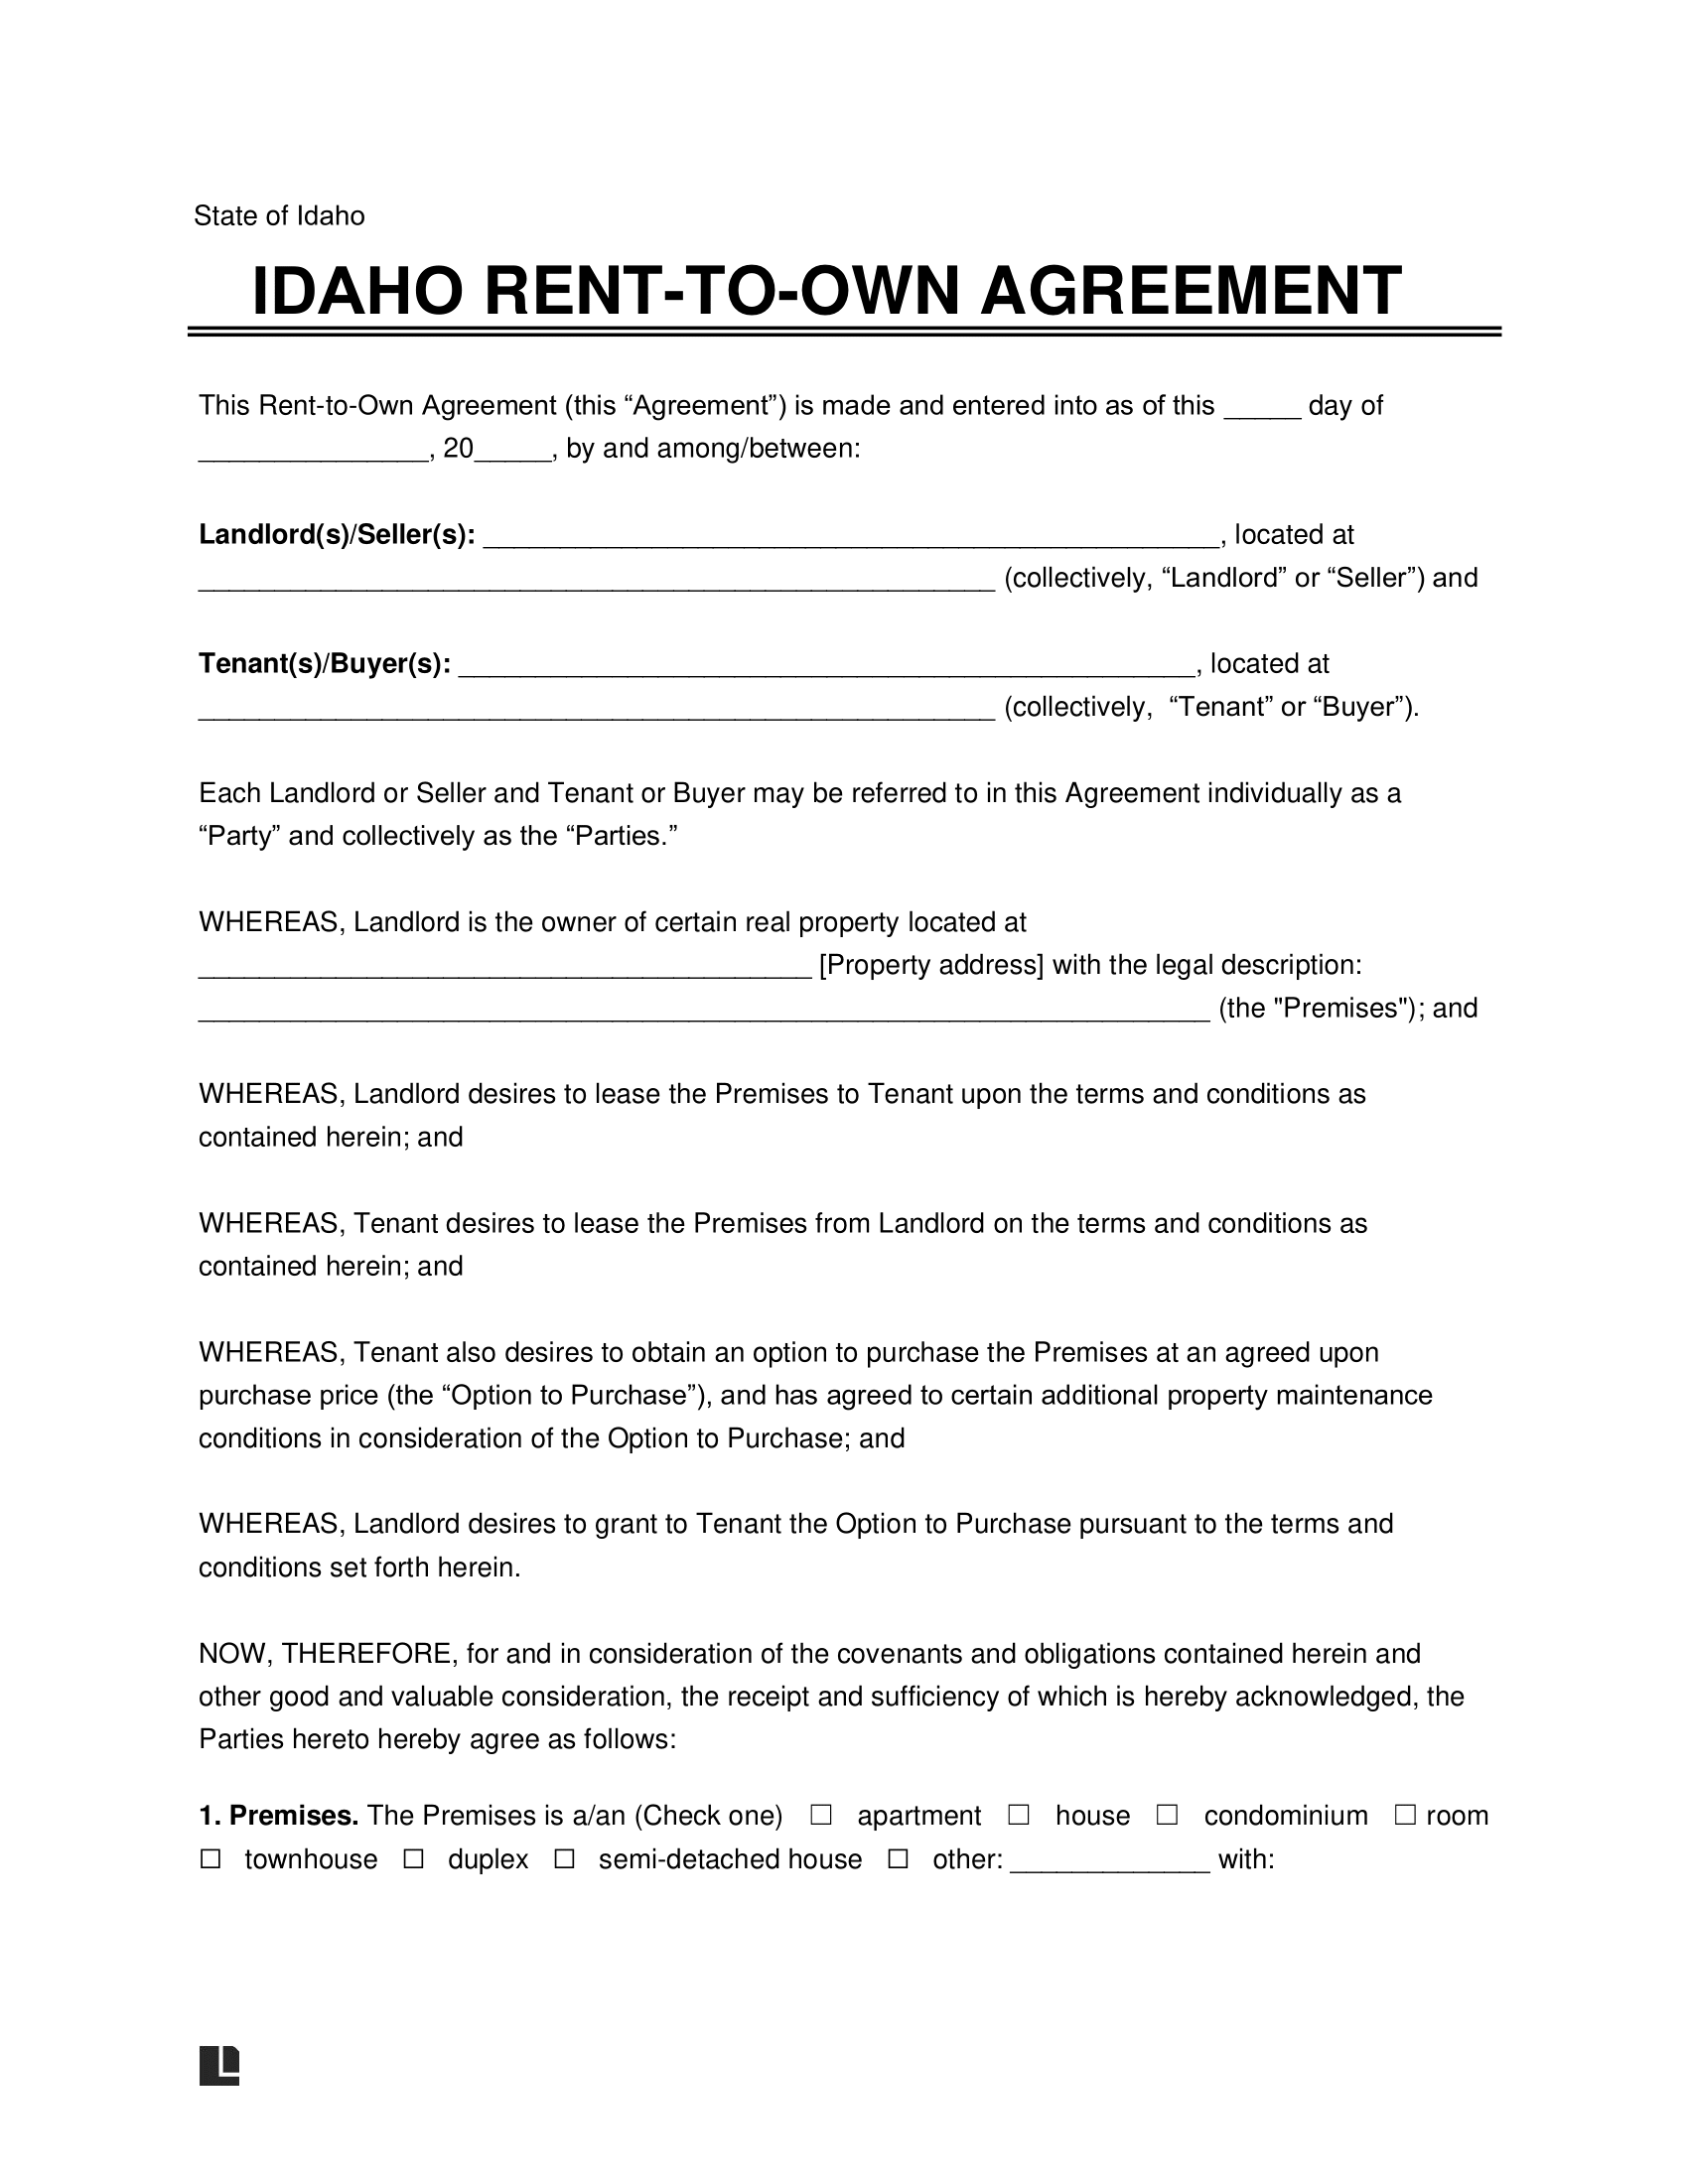 Idaho Lease-to-Own Option-to-Purchase Agreement